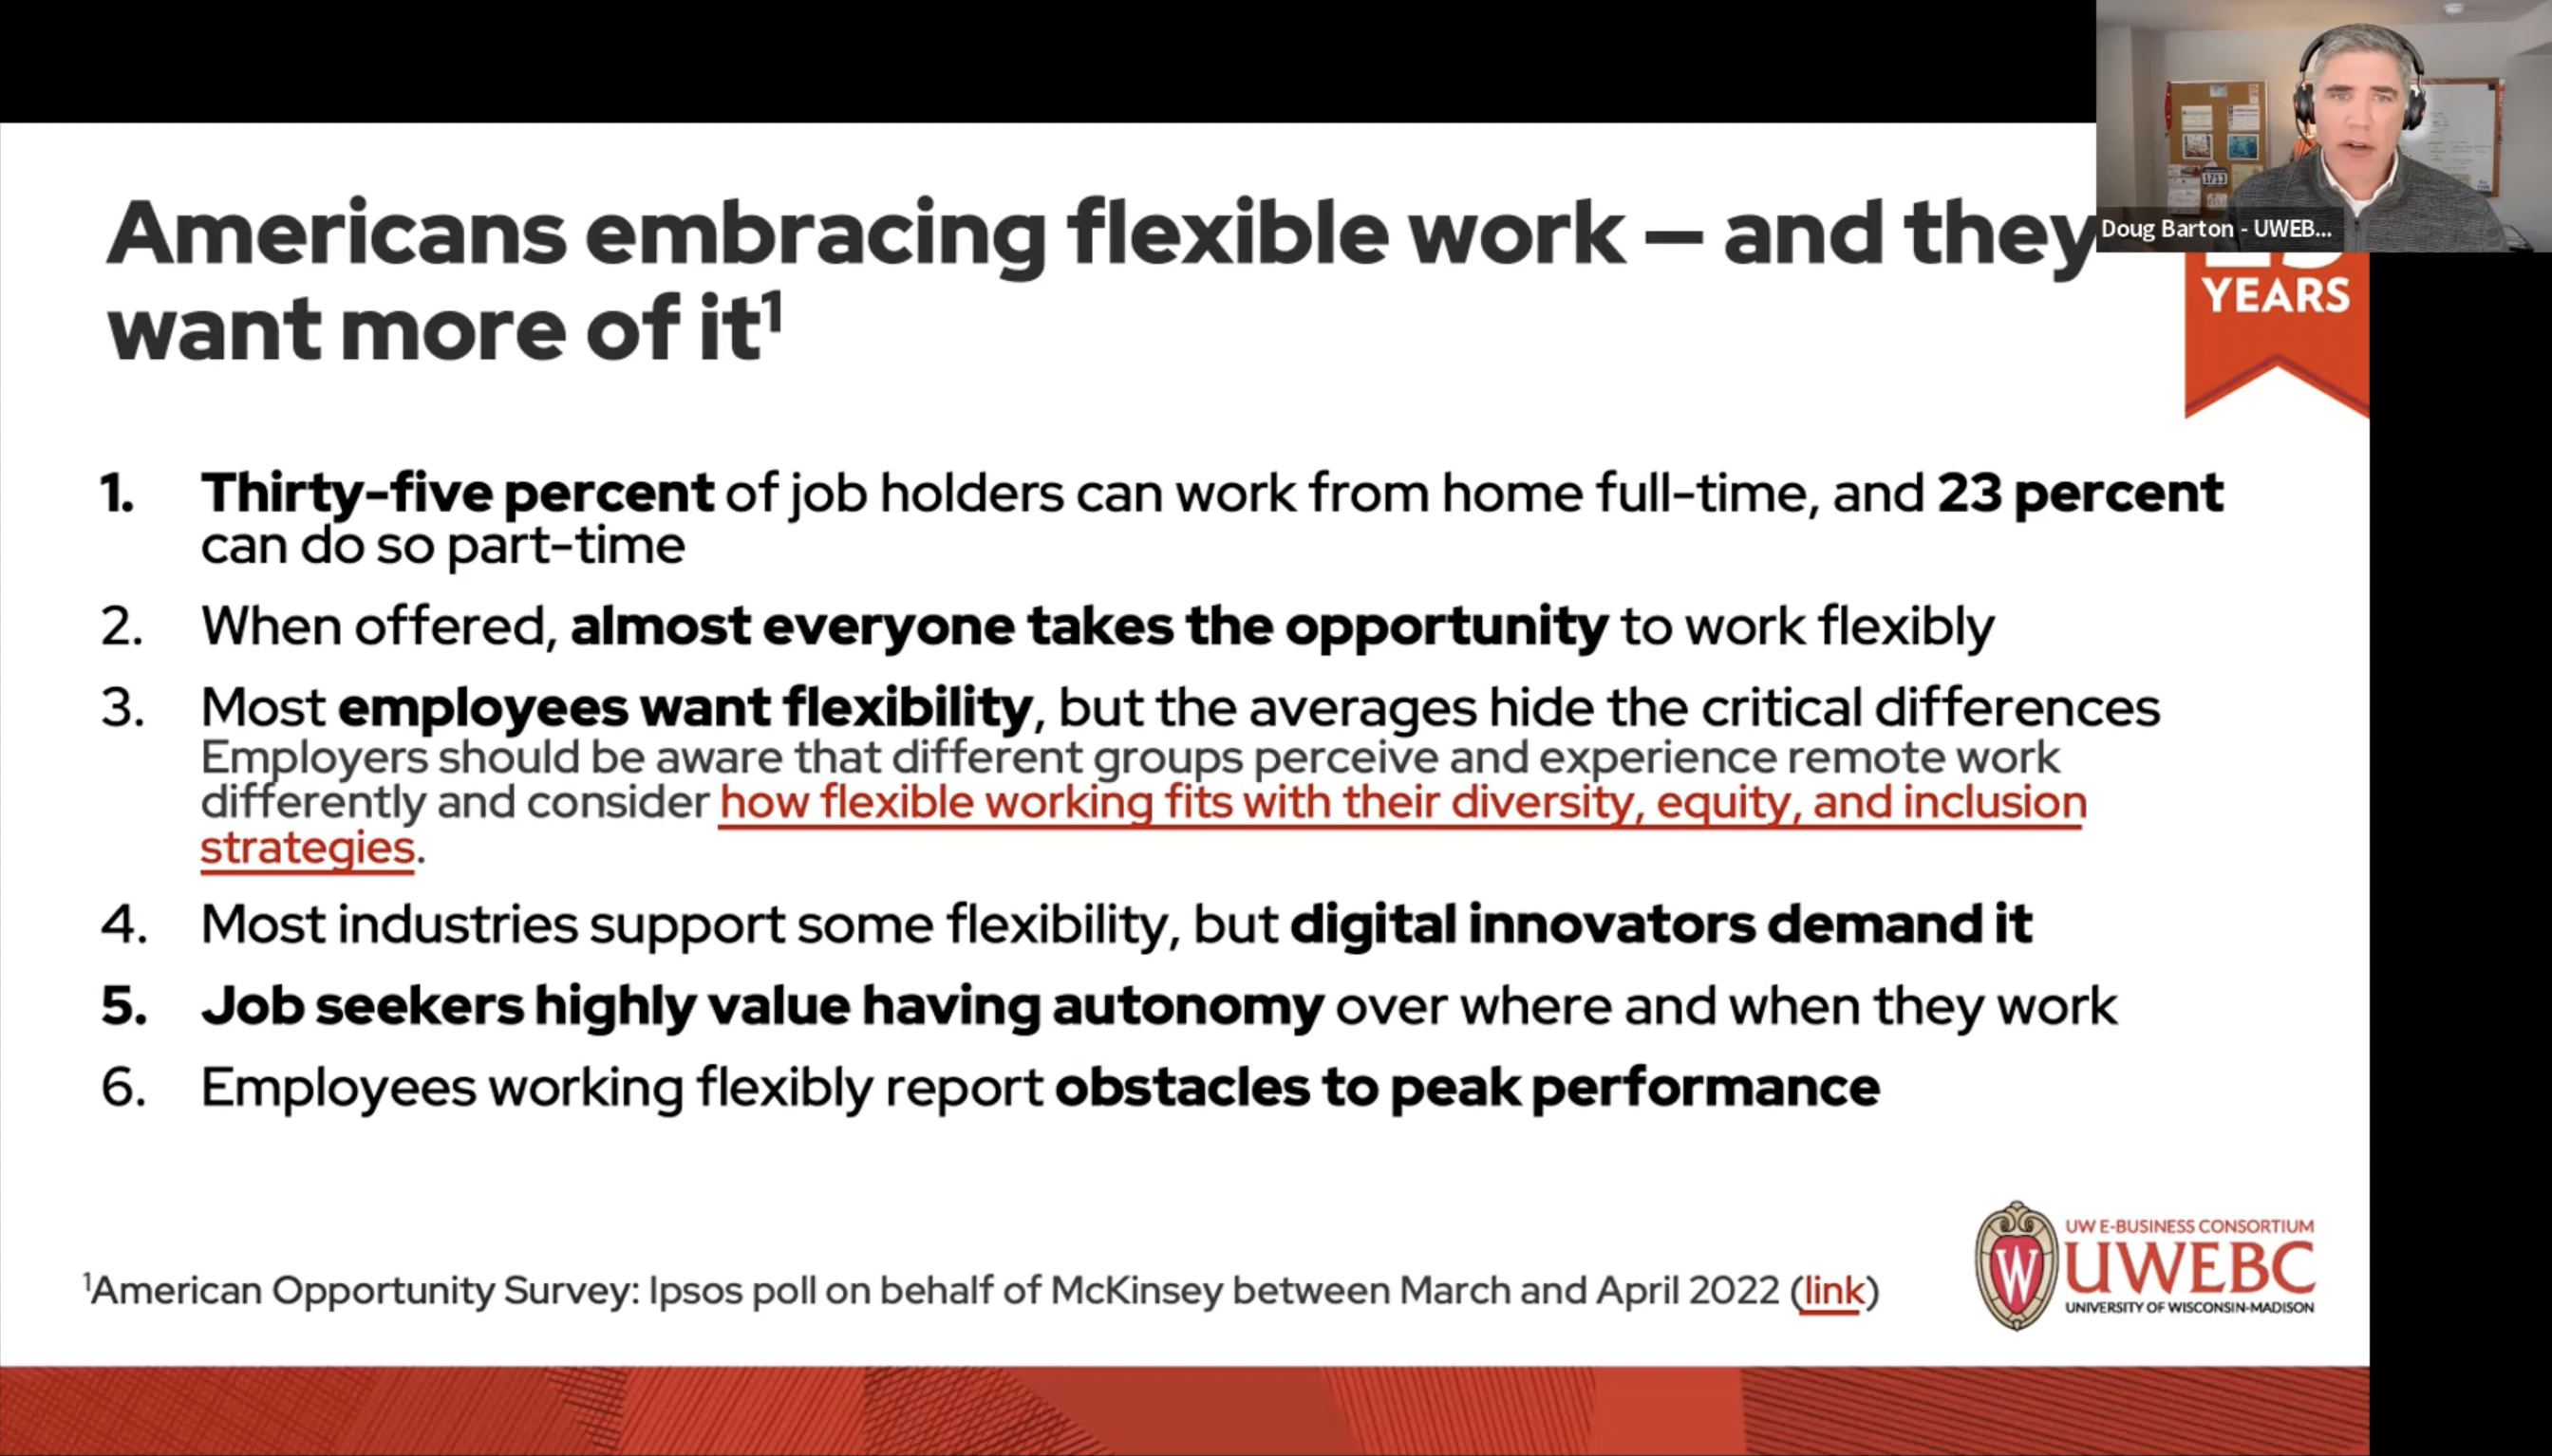 1. UWEBC Presentation: Hybrid Work is Here to Stay: Focus on Future of Work, Culture, and Inclusion thumbnail